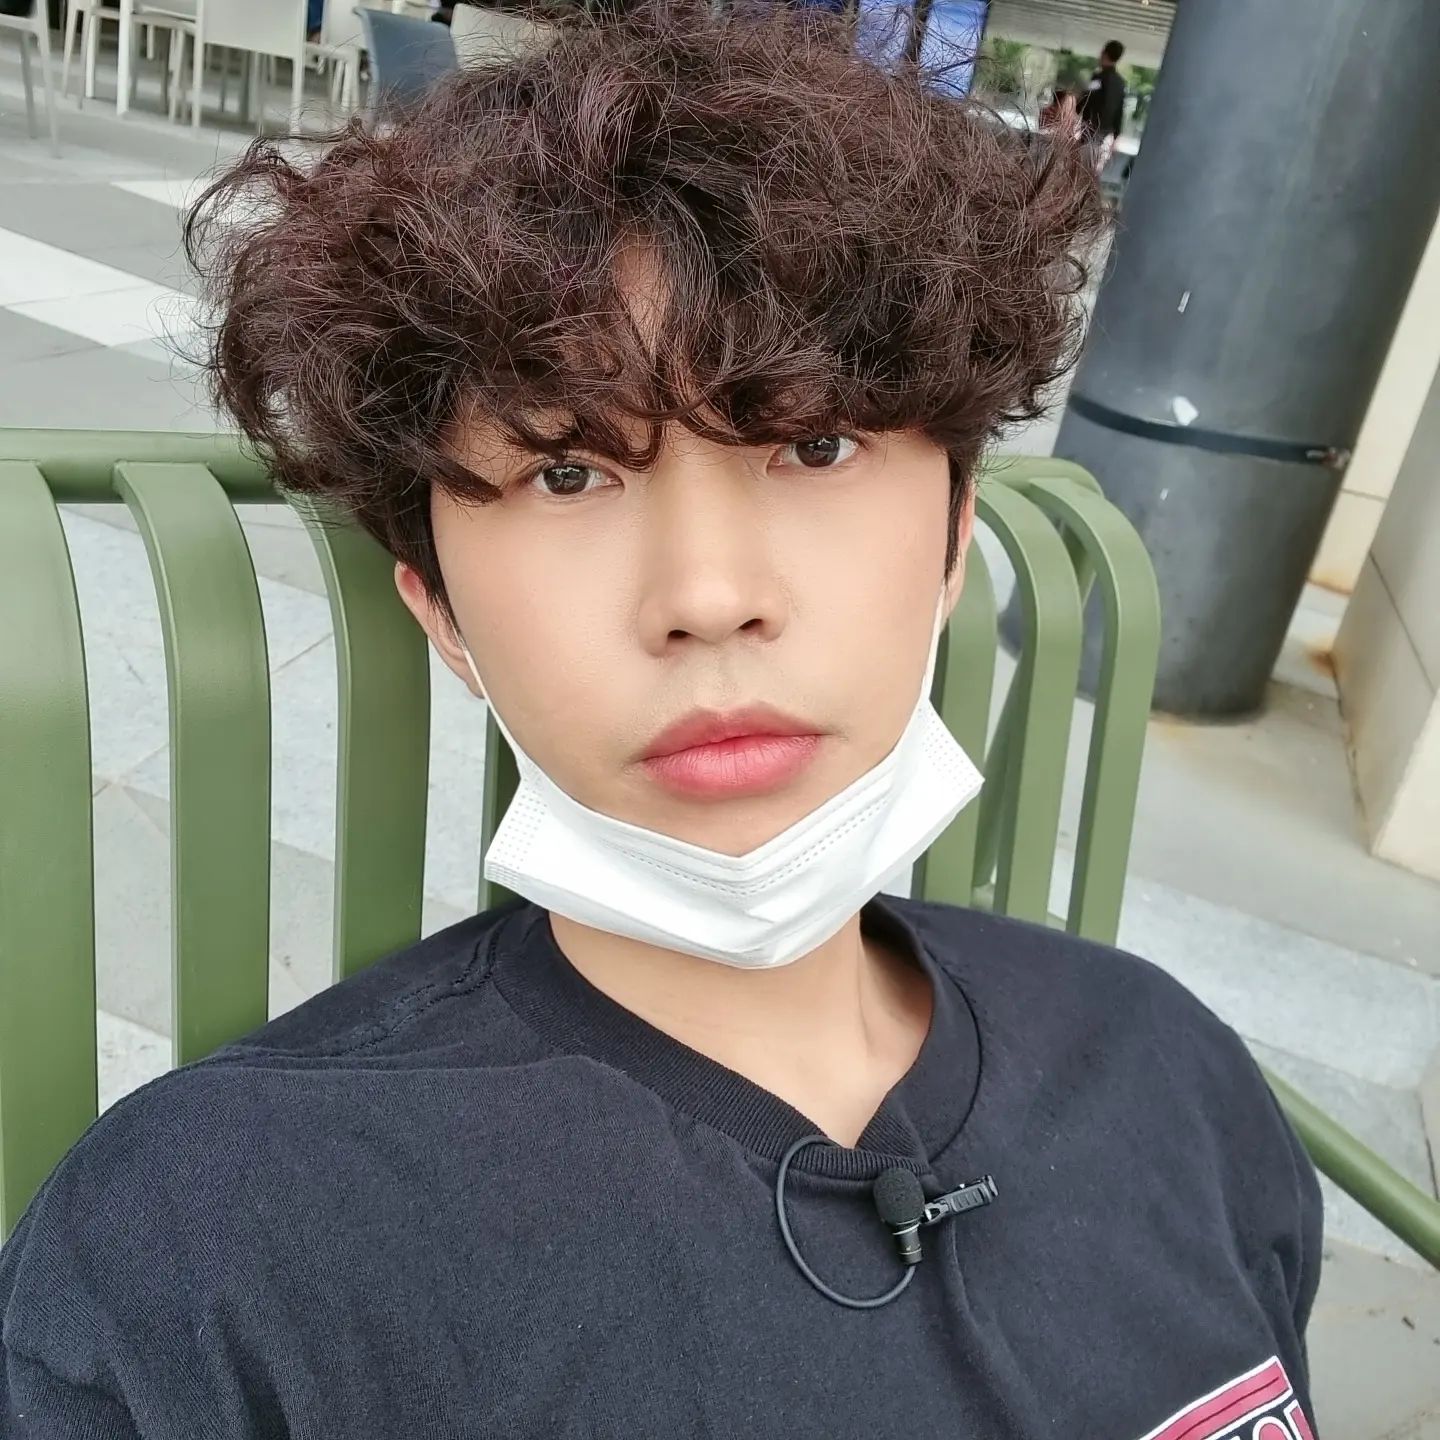 Lim Young-woong, idol styling.. you did a good job with wavy hair